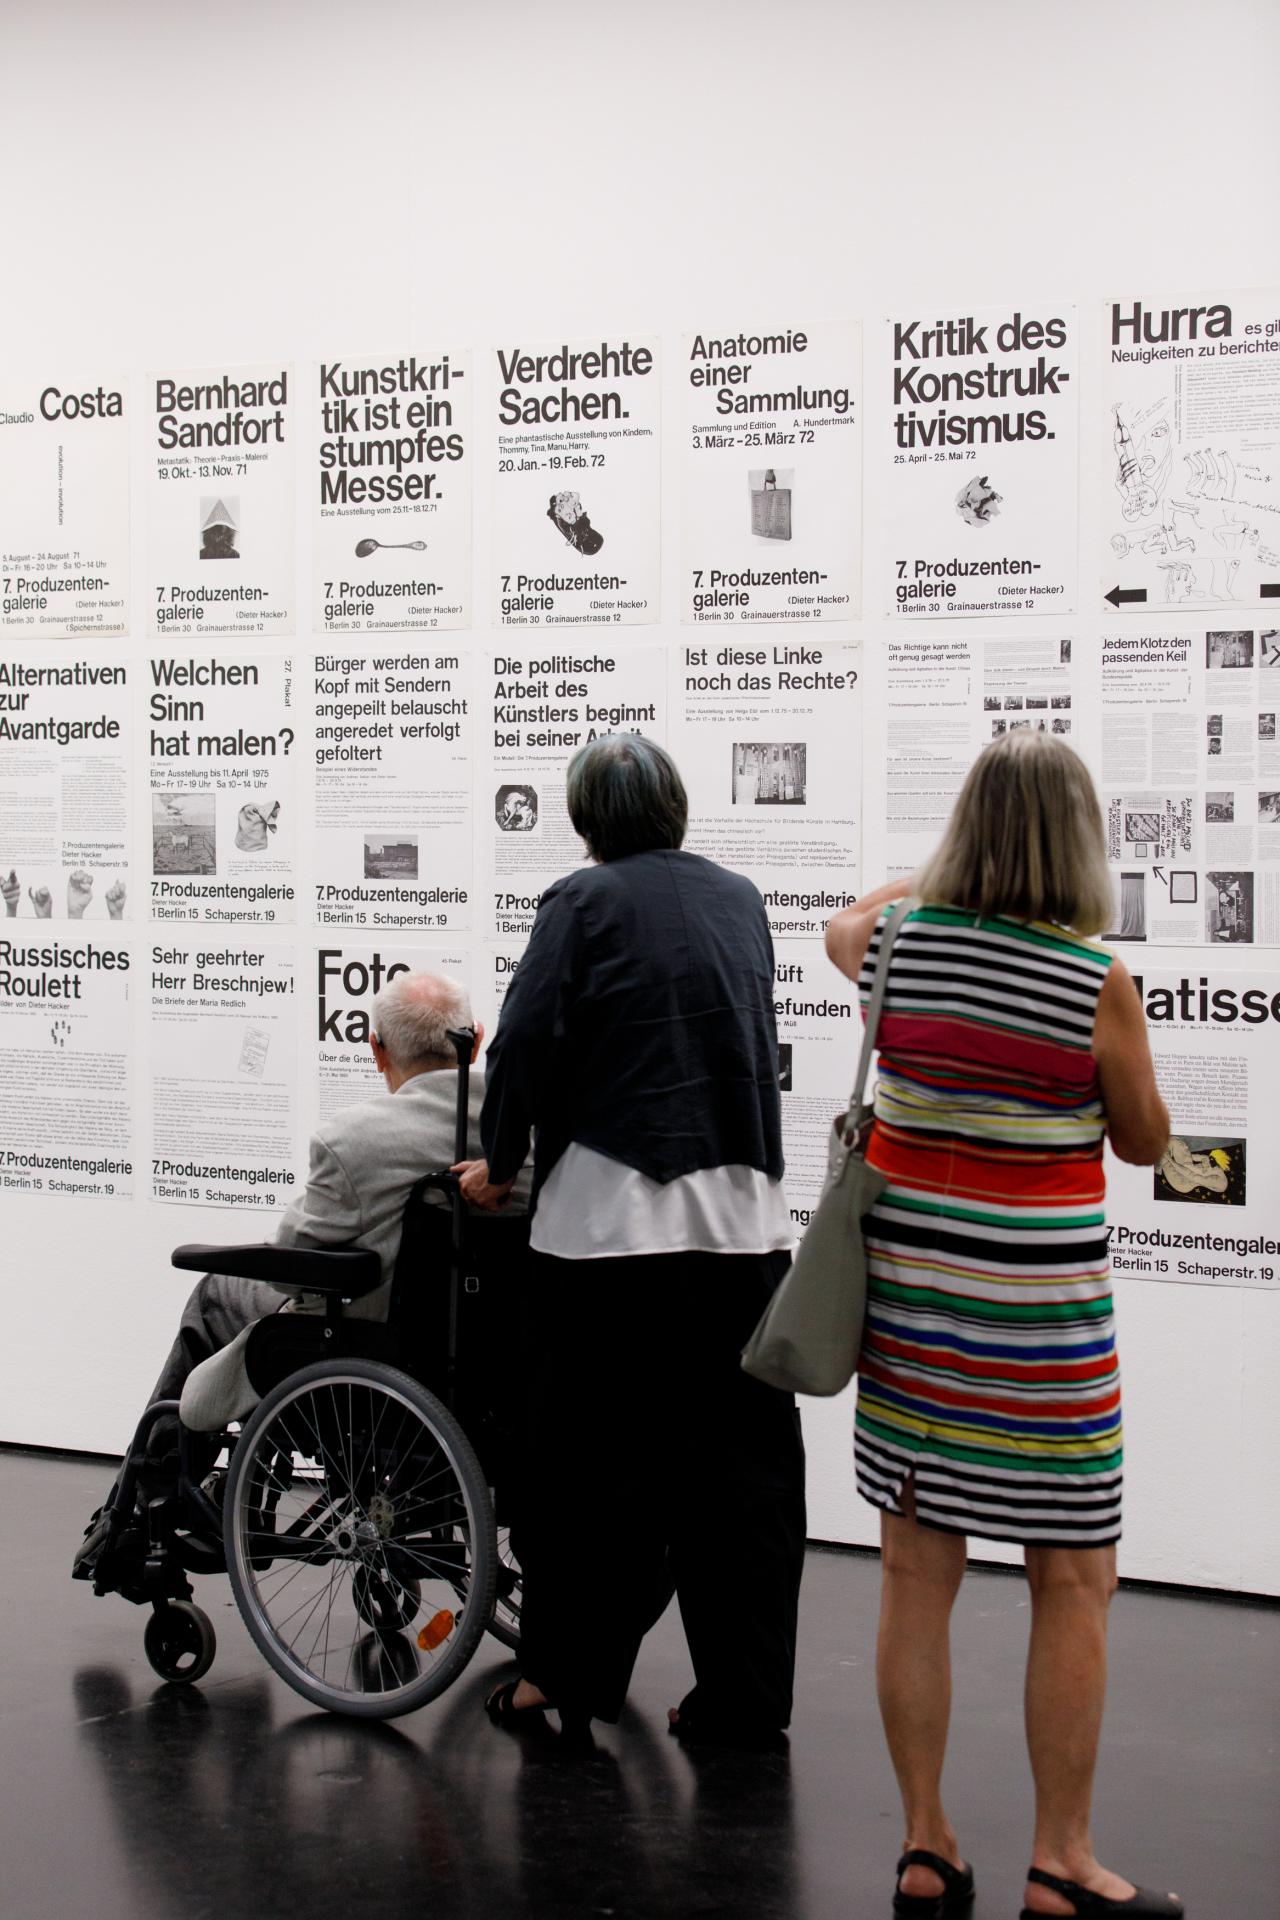 The picture shows three visitors in front of posters with typography 